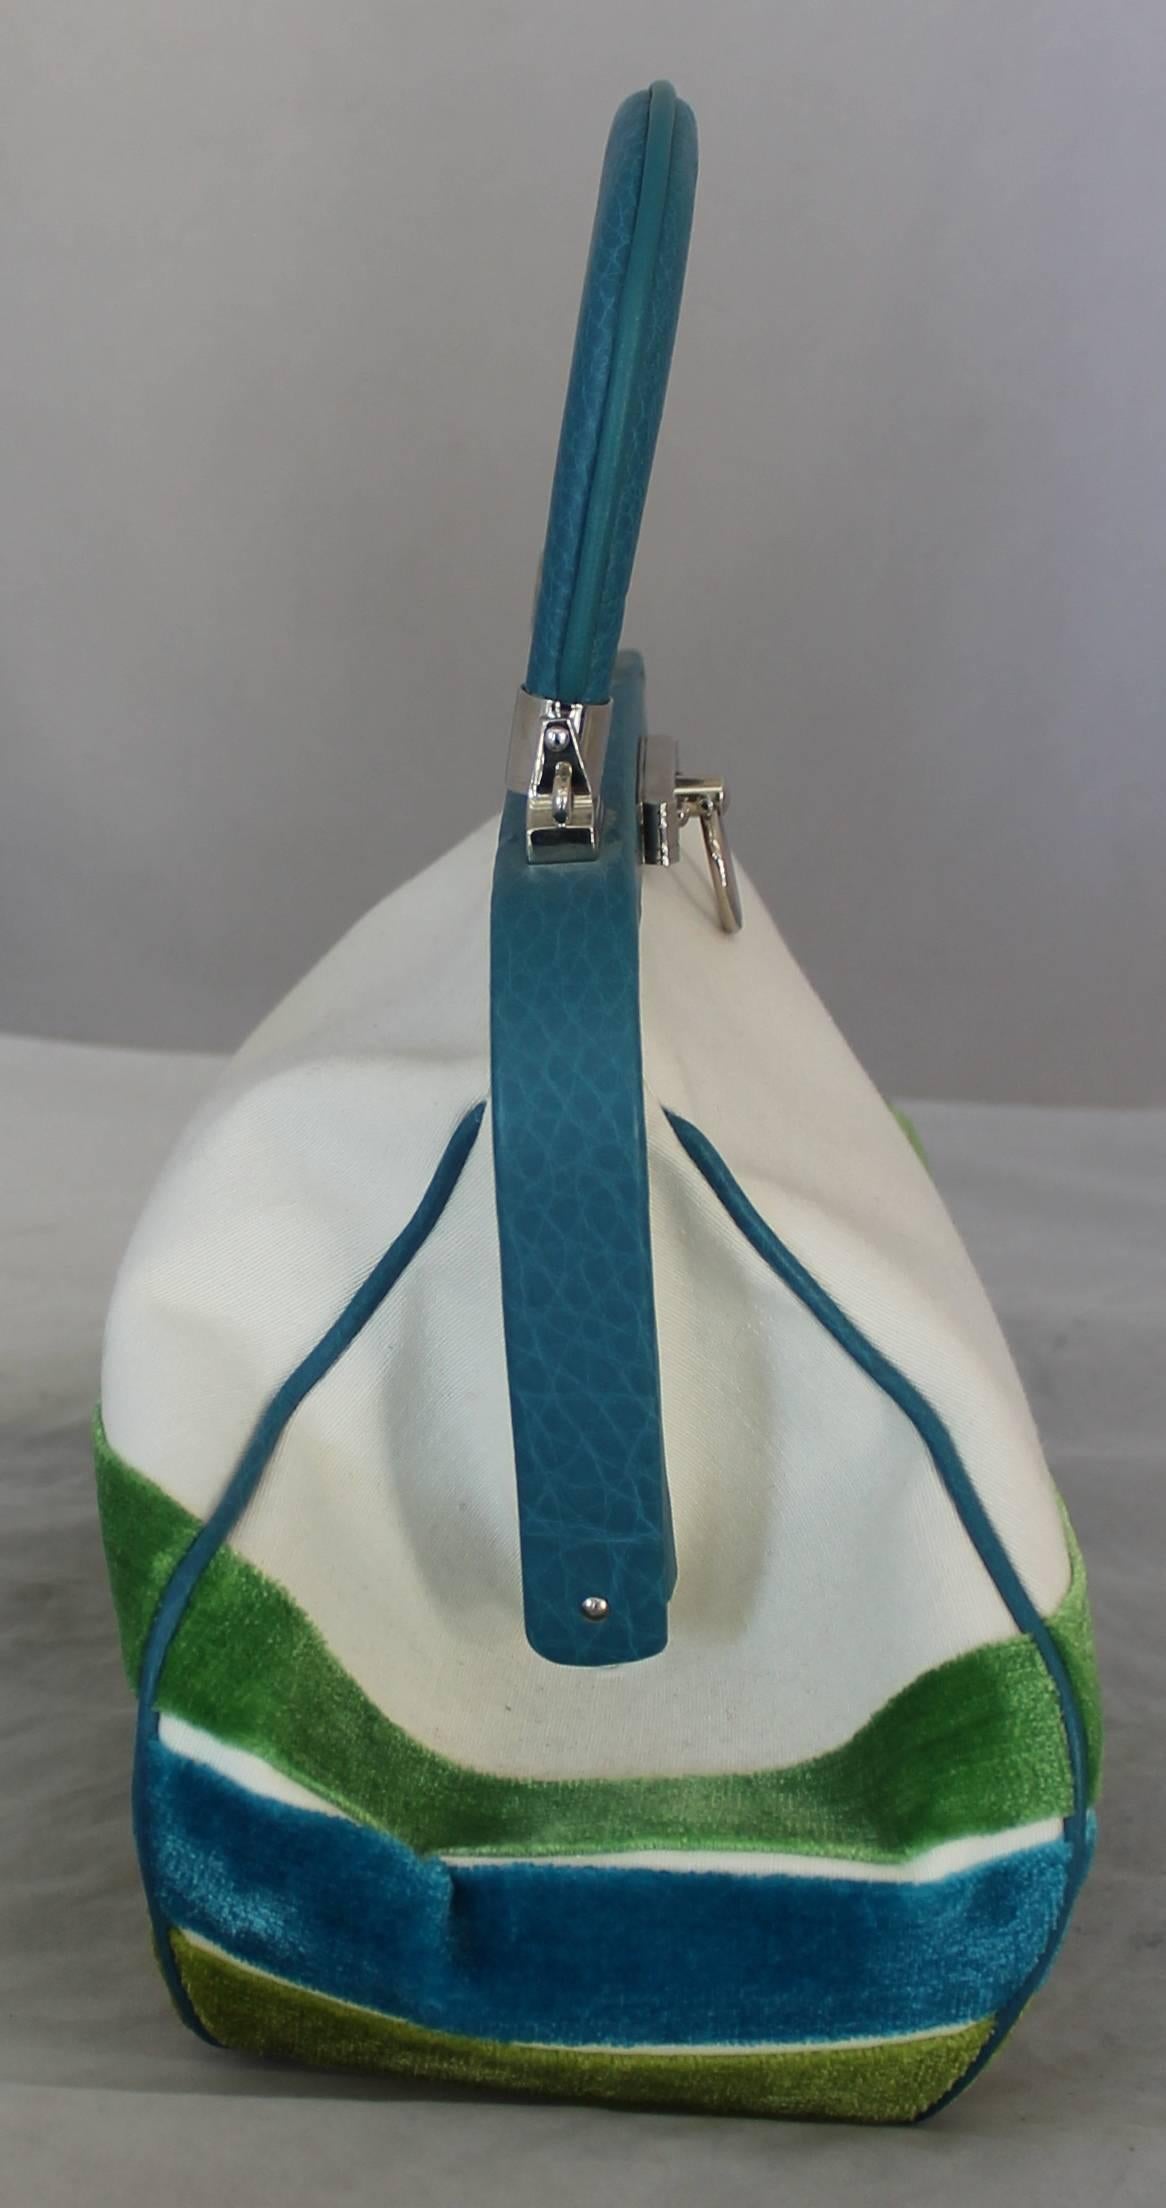 Roberta di Camerino 1990's White, Blue, & Green Velvet & Cotton Handbag.  This vintage bag is in excellent vintage condition.  It features green and blue velvet stripes and a white cotton top.  The trim and the handle are a beautiful blue leather. 